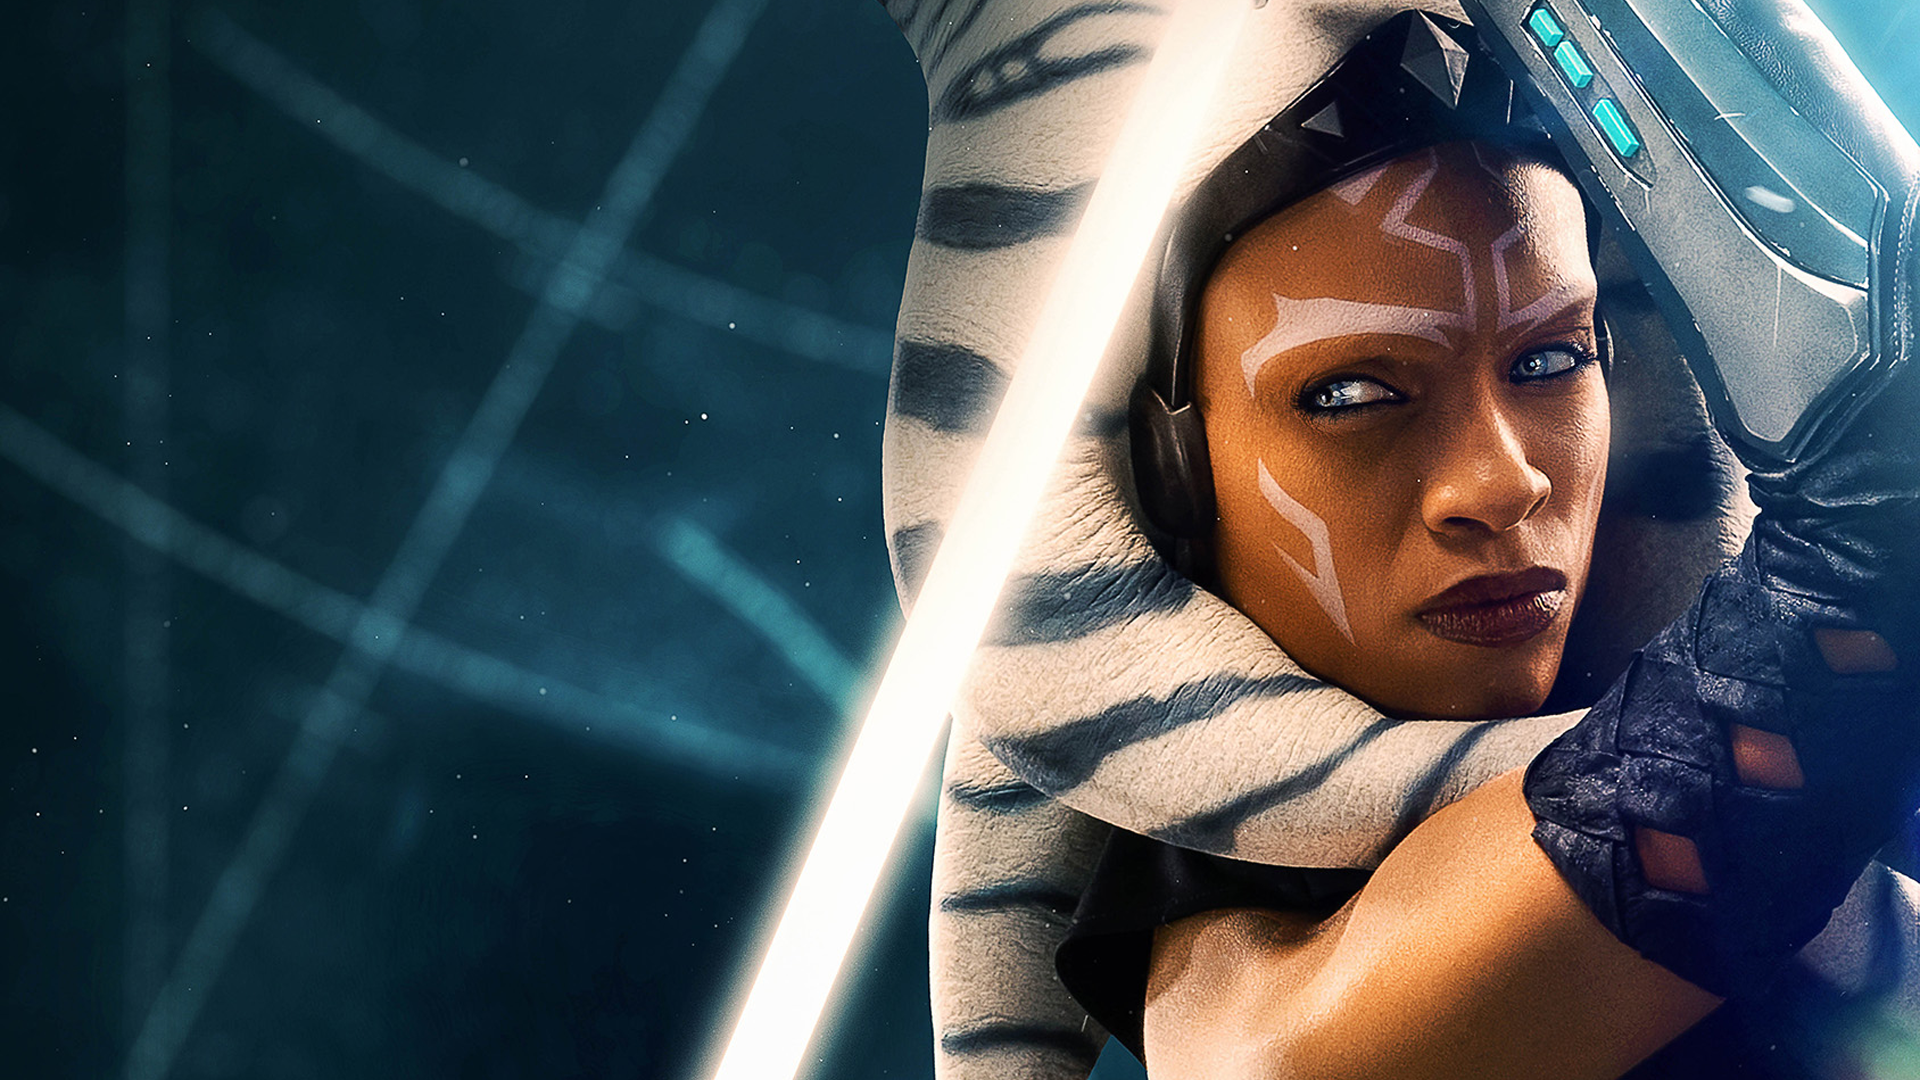 An Exciting Update Has Been Released For Lucasfilm's 'Ahsoka' Series —  CultureSlate